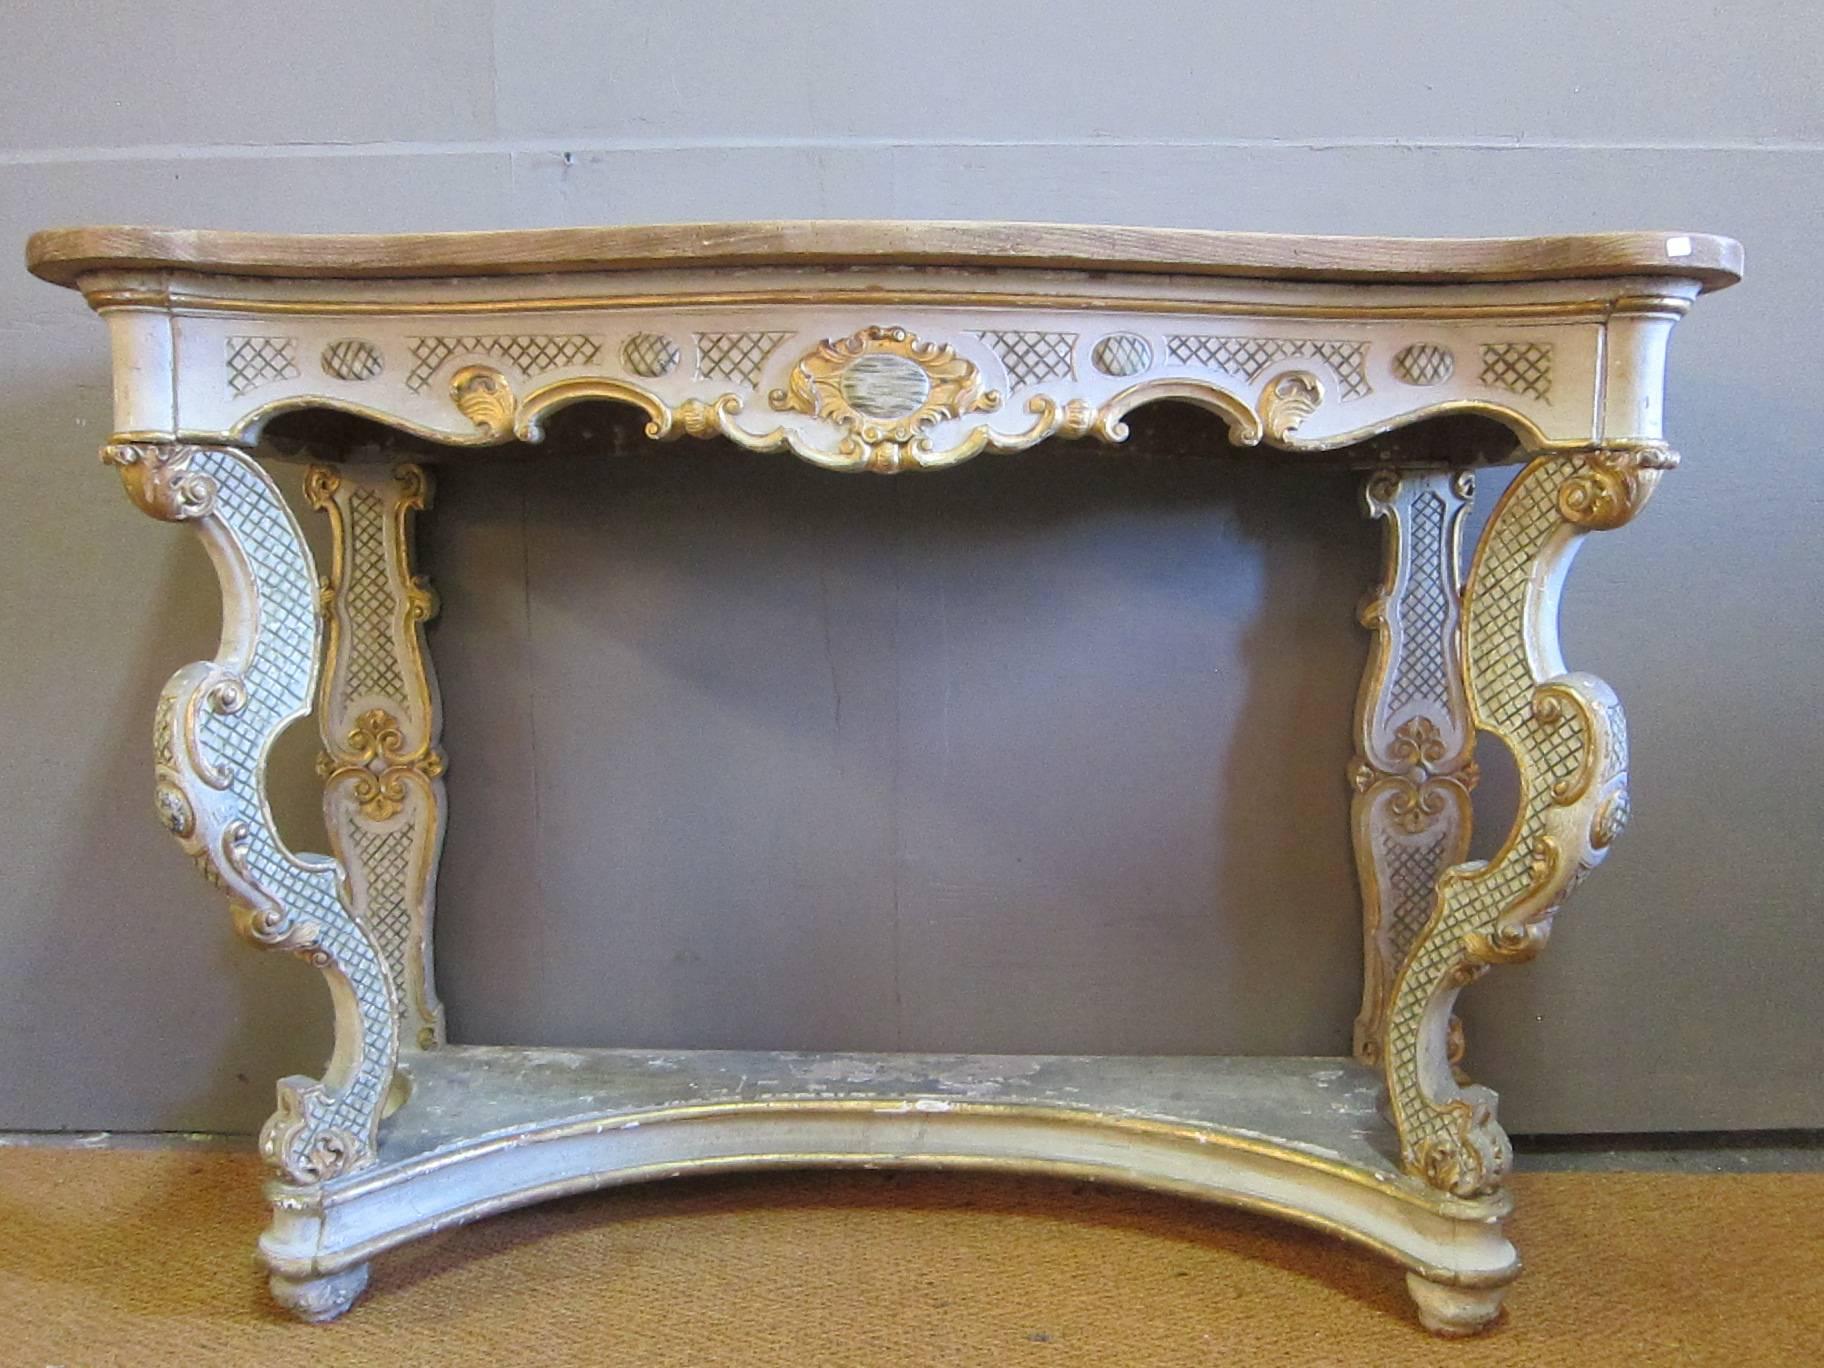 Early 19th century Italian Baroque console table. A painted console with gesso, exposed wood top, legs on raised plinth with ball feet. Very individual having large-scale with tremendous presence.